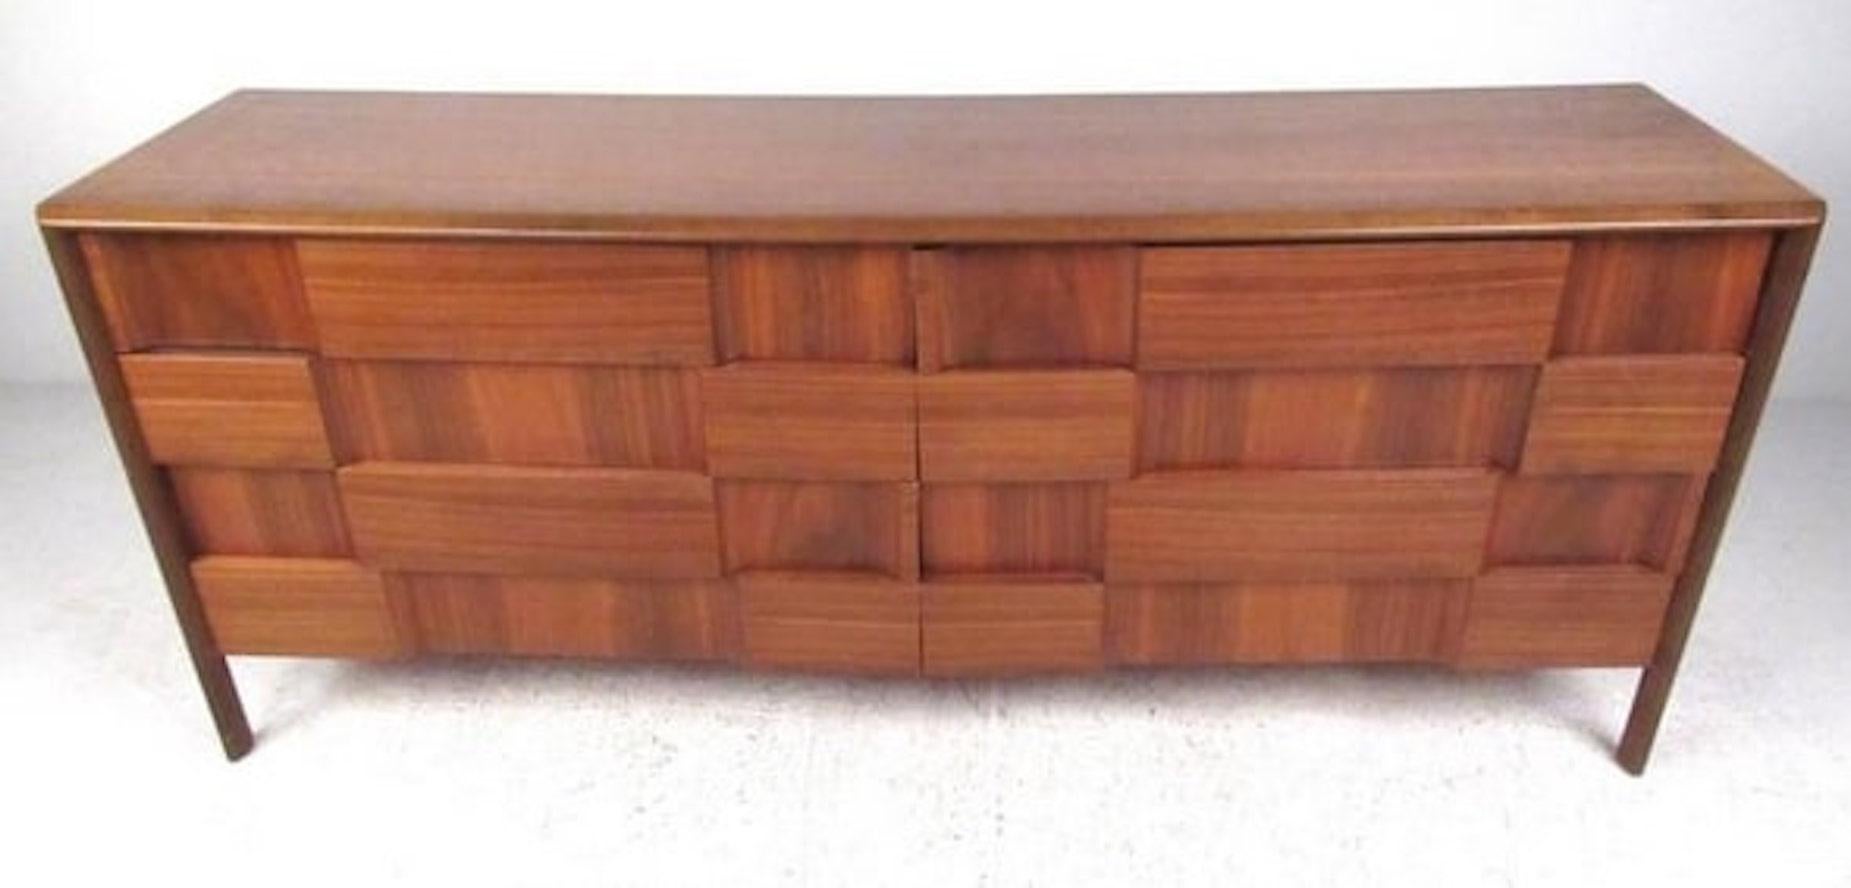 Eight-drawer walnut dresser by Edmond Spence, Sweden, circa 1960 makes an ideal nine drawer dresser, perfect for home bedroom. Sculpted checkerboard front makes an impressive addition to any interior, please confirm item location (NY or NJ).